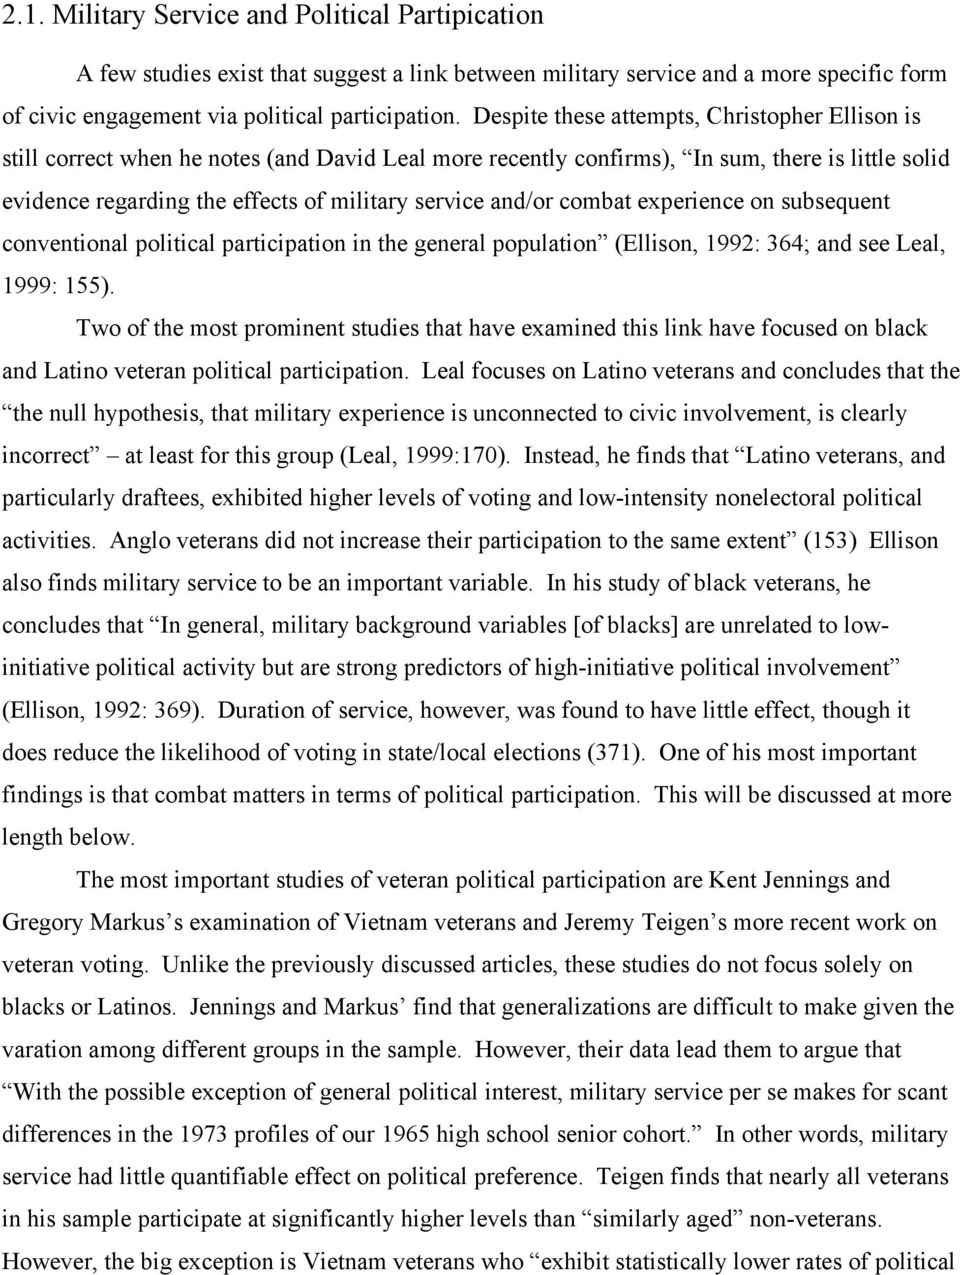 and/or combat experience on subsequent conventional political participation in the general population (Ellison, 1992: 364; and see Leal, 1999: 155).